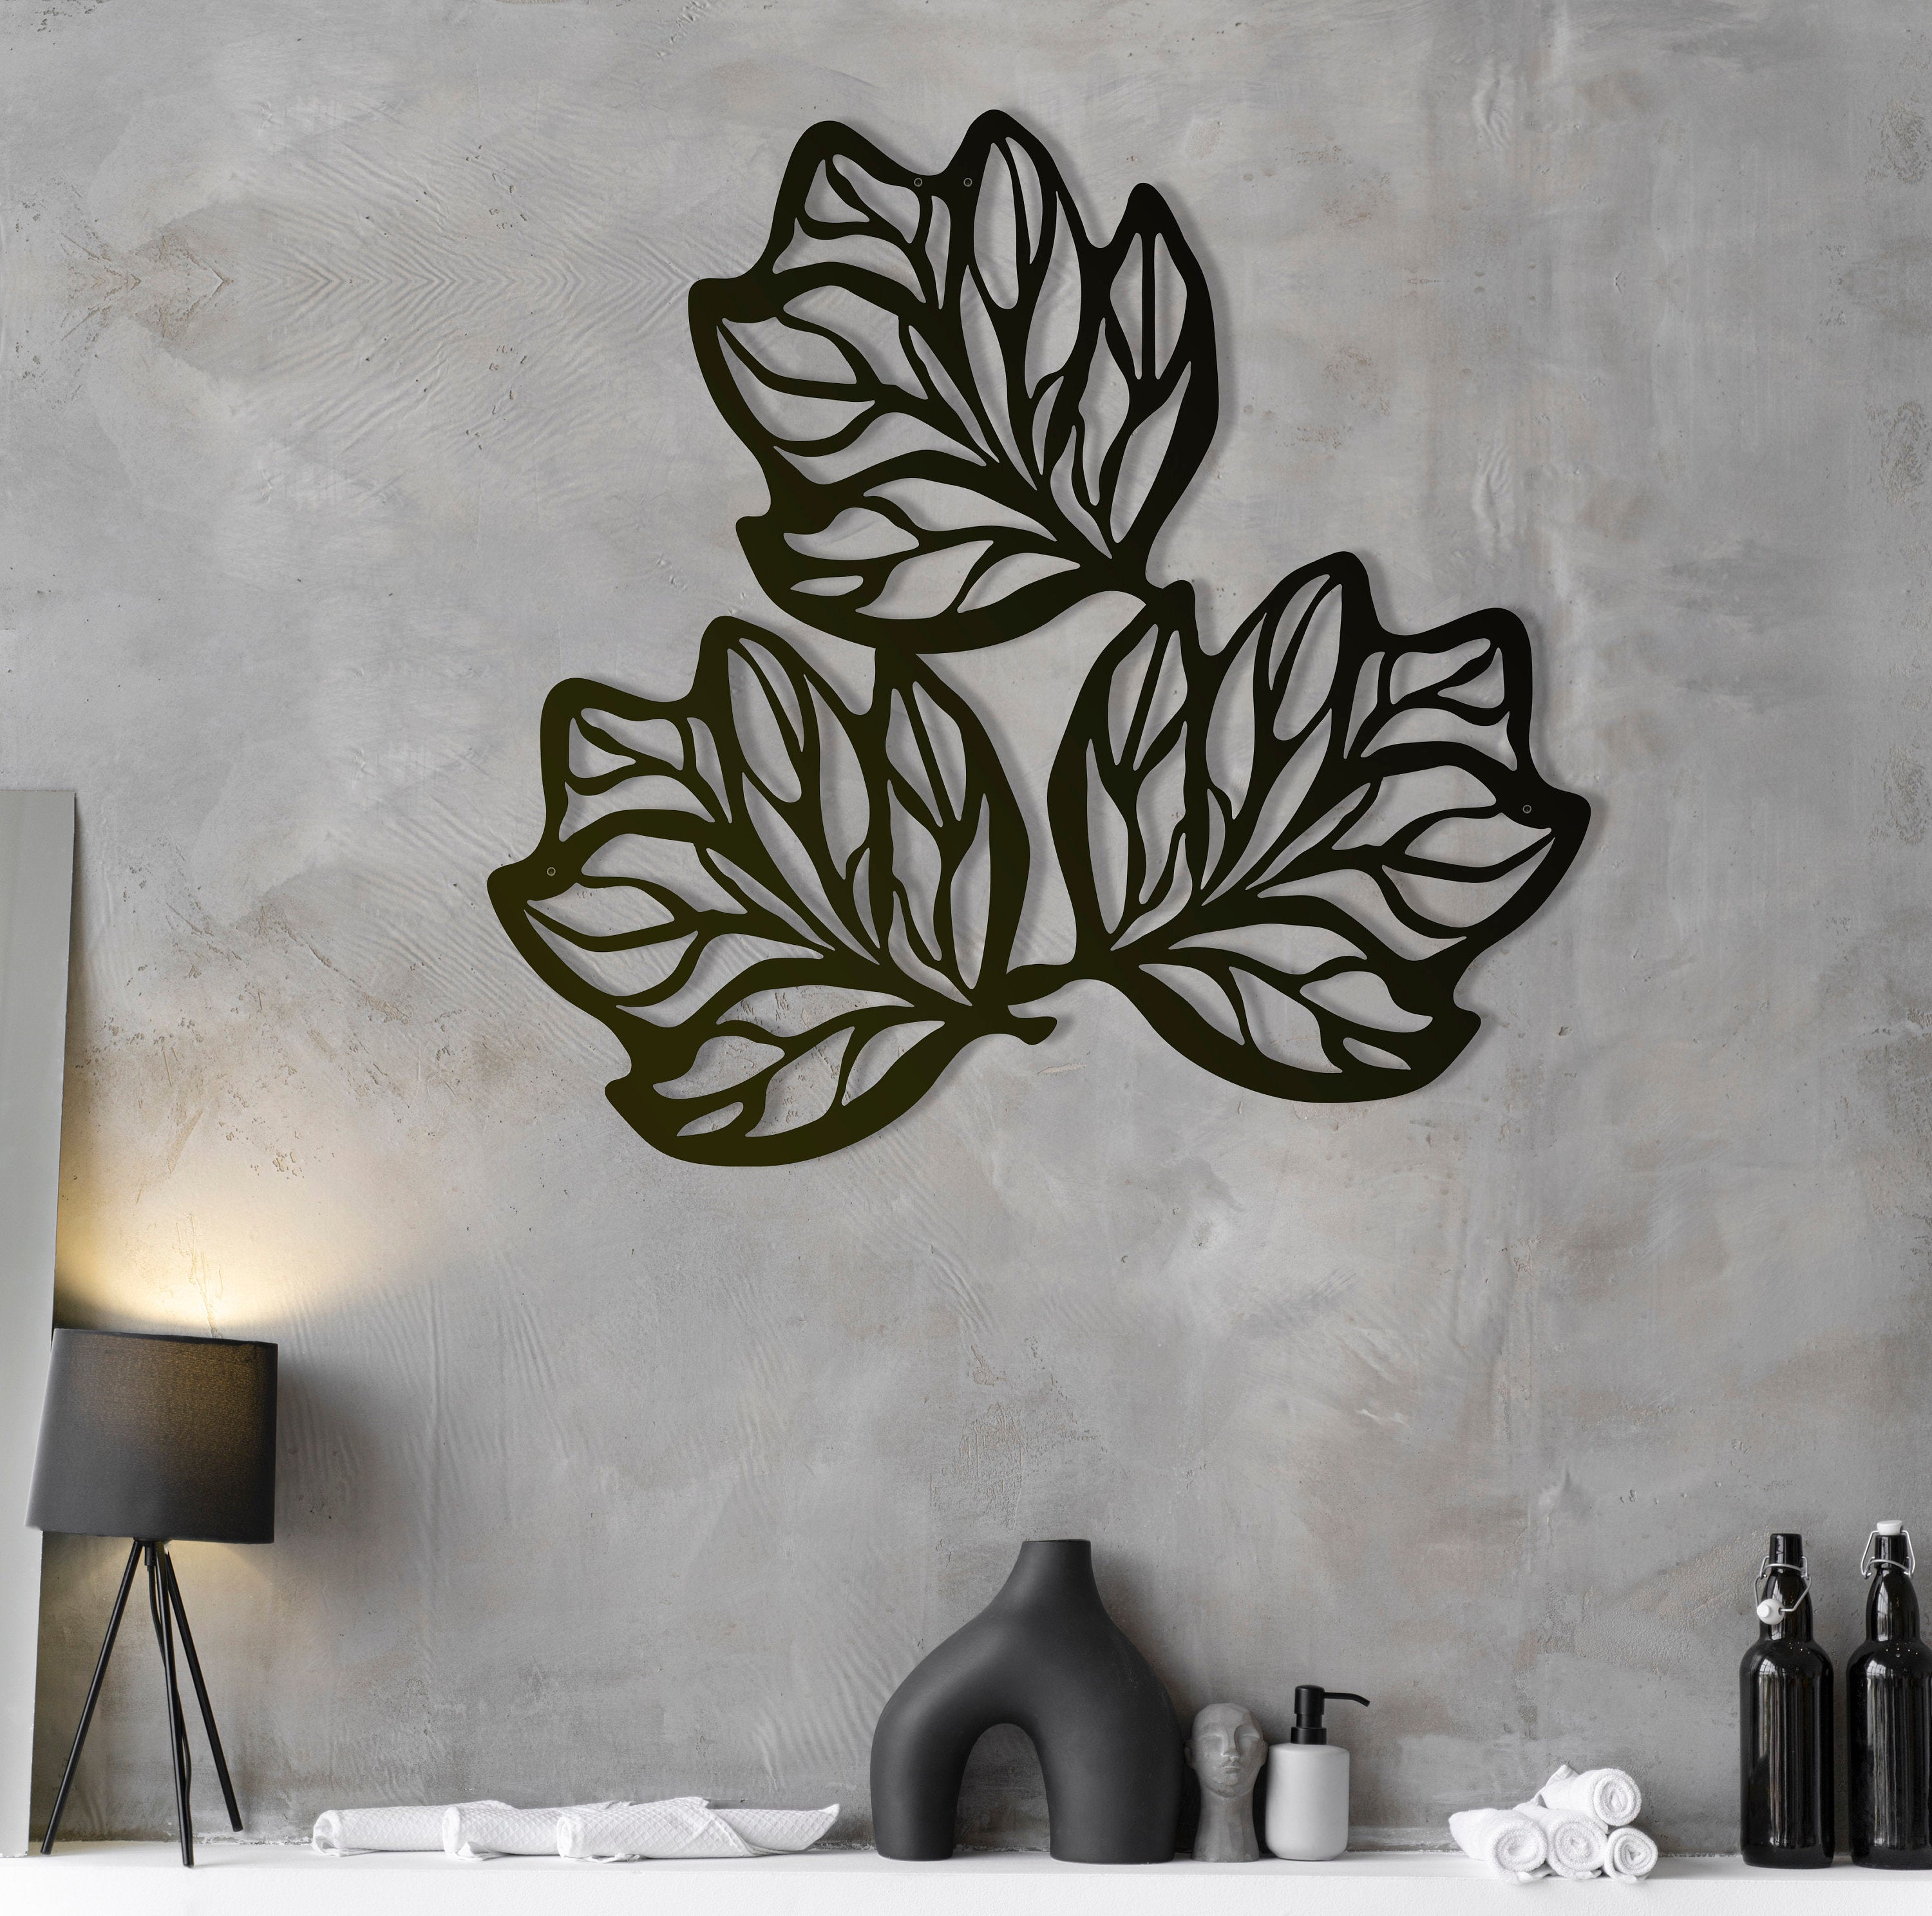 Leaves Metal Wall Decor, Autumn Wall Decor, Oversized Room Wall Decor, Farmhouse Wall Hangings Decor, Mother Gift